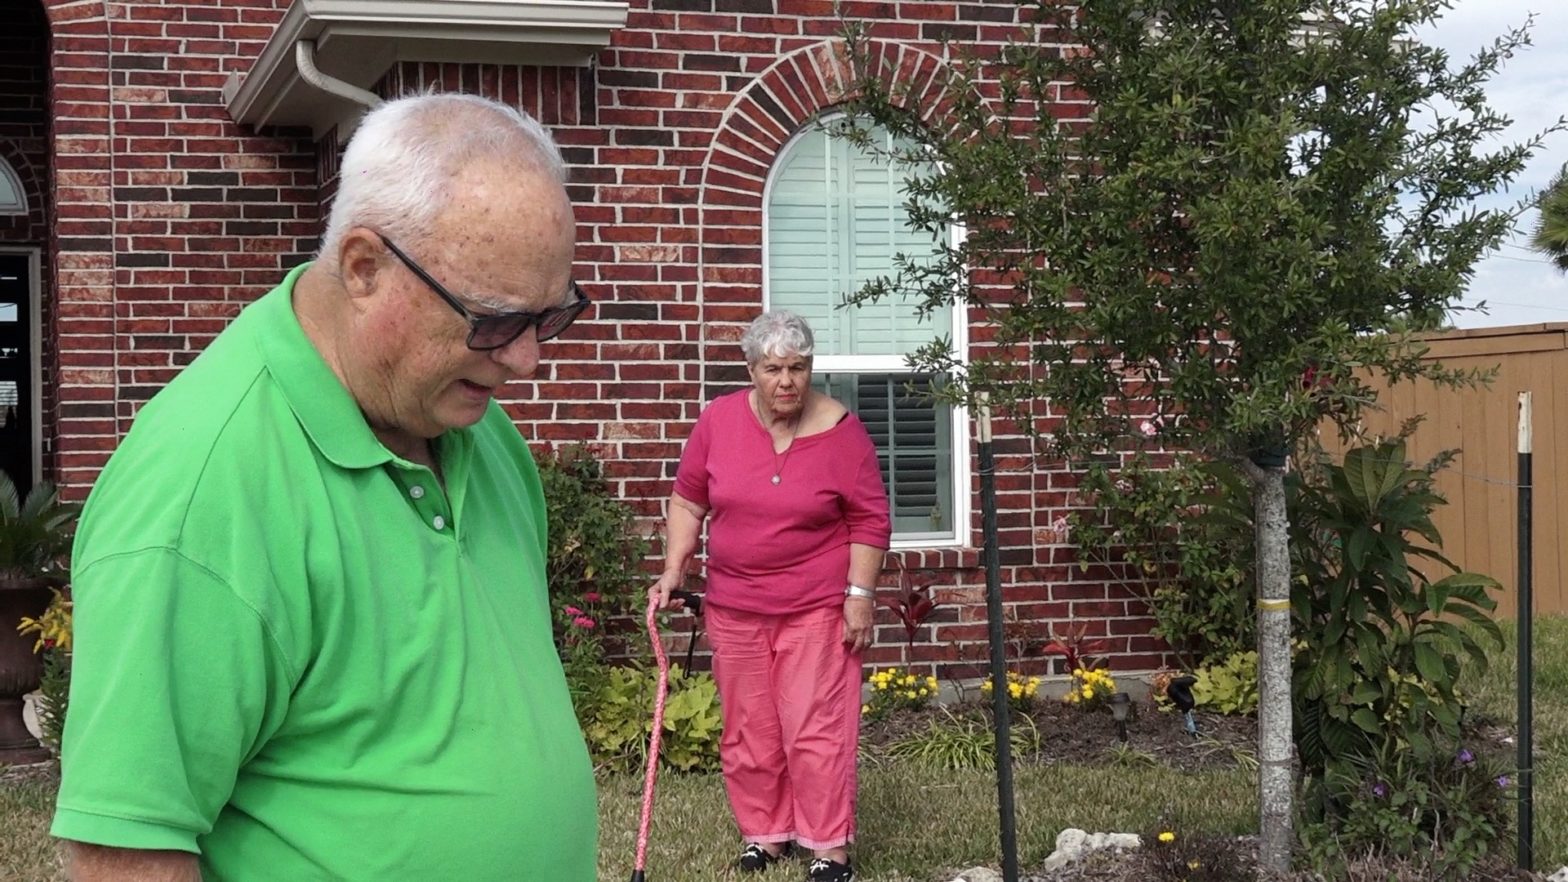 HOA sues elderly couple over flower beds, seeking up to $100,000 in damages